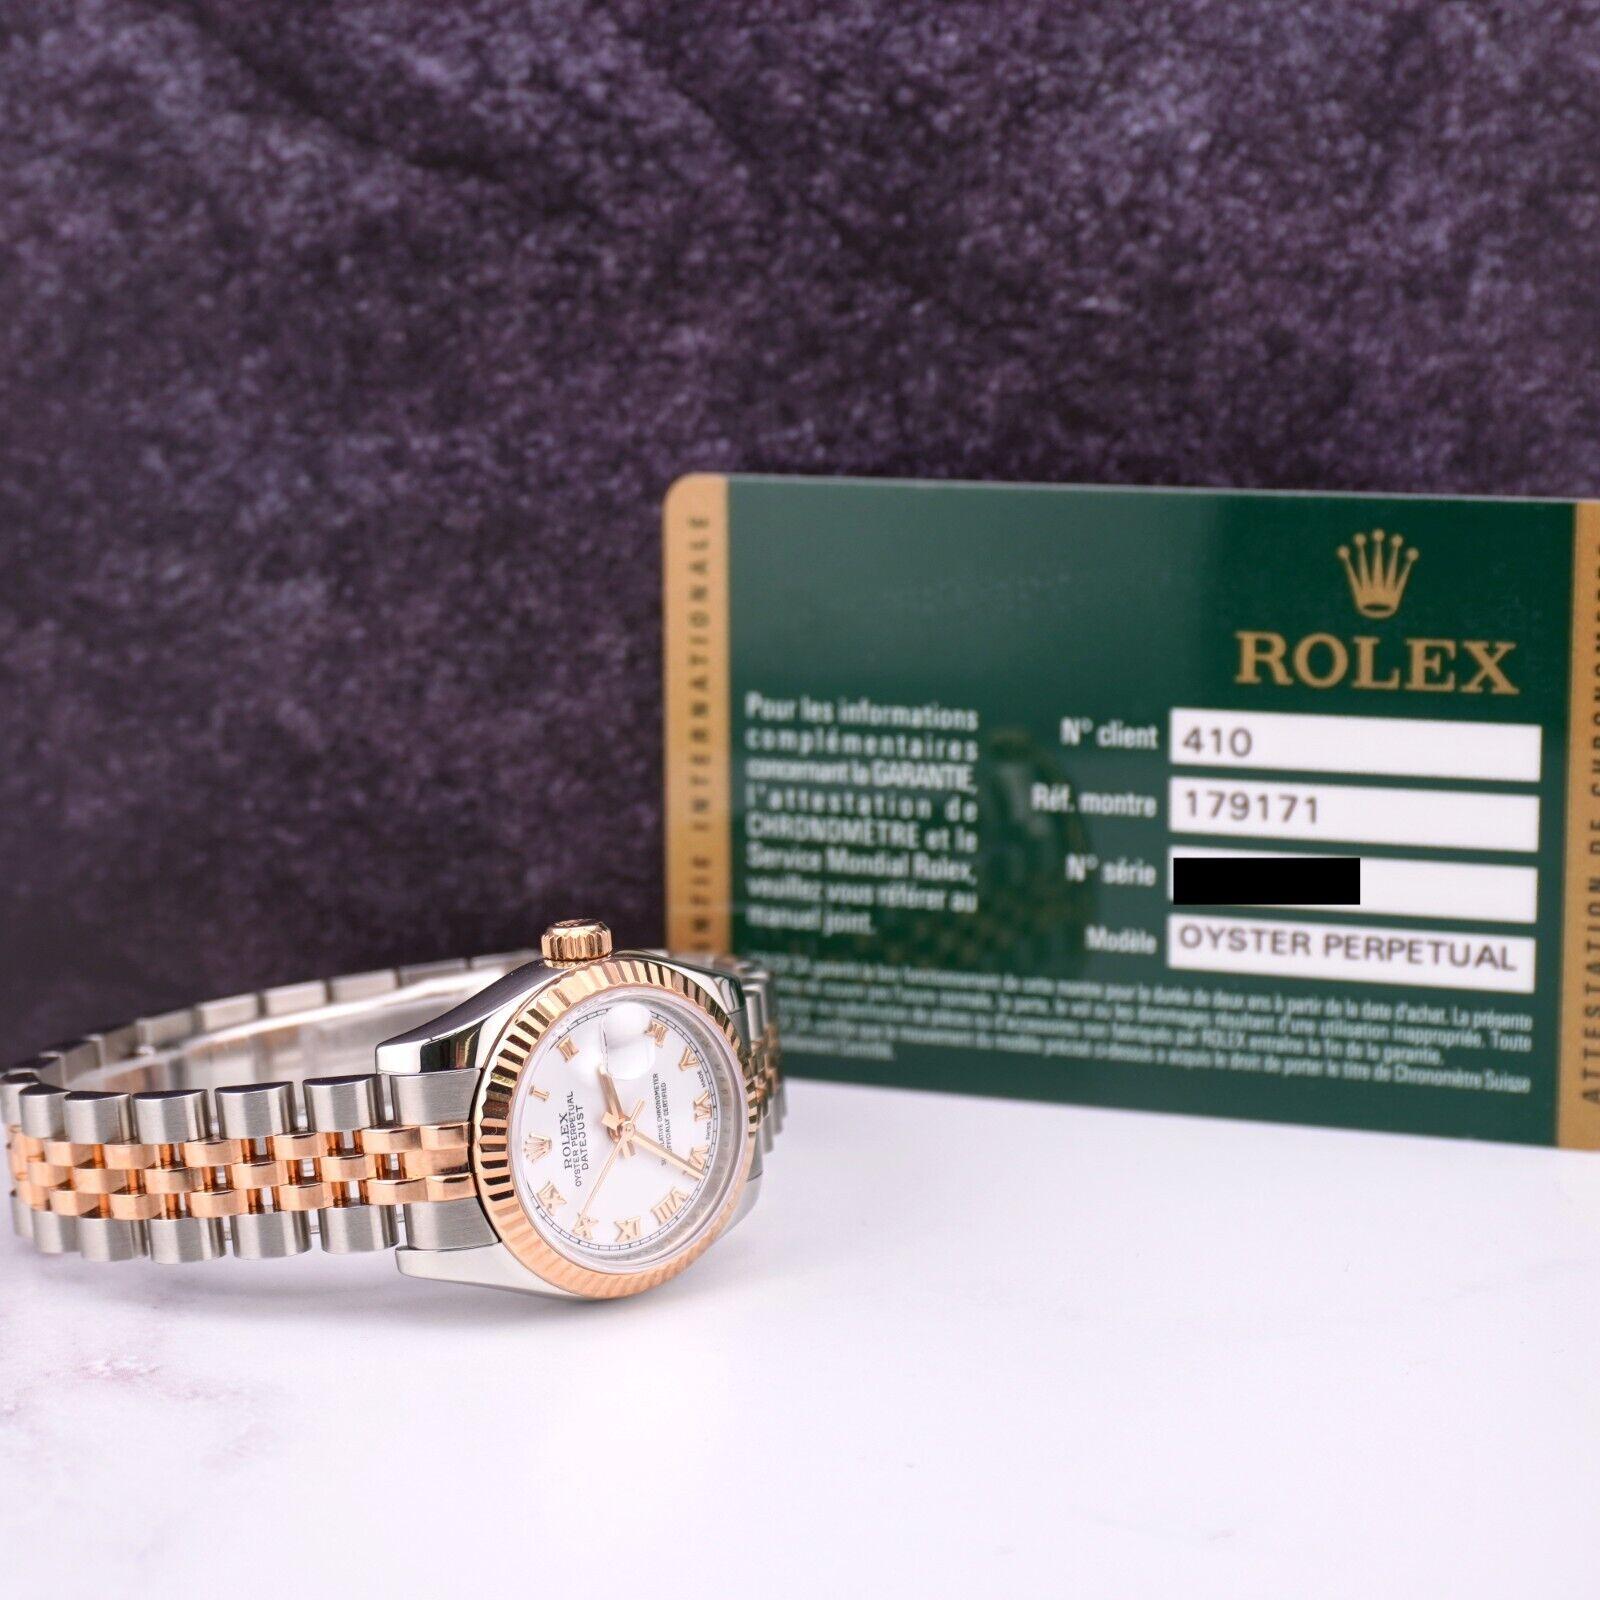 Rolex Datejust 26mm 18k Rose Gold & Steel Fluted Jubilee White Dial Watch 179171 For Sale 3